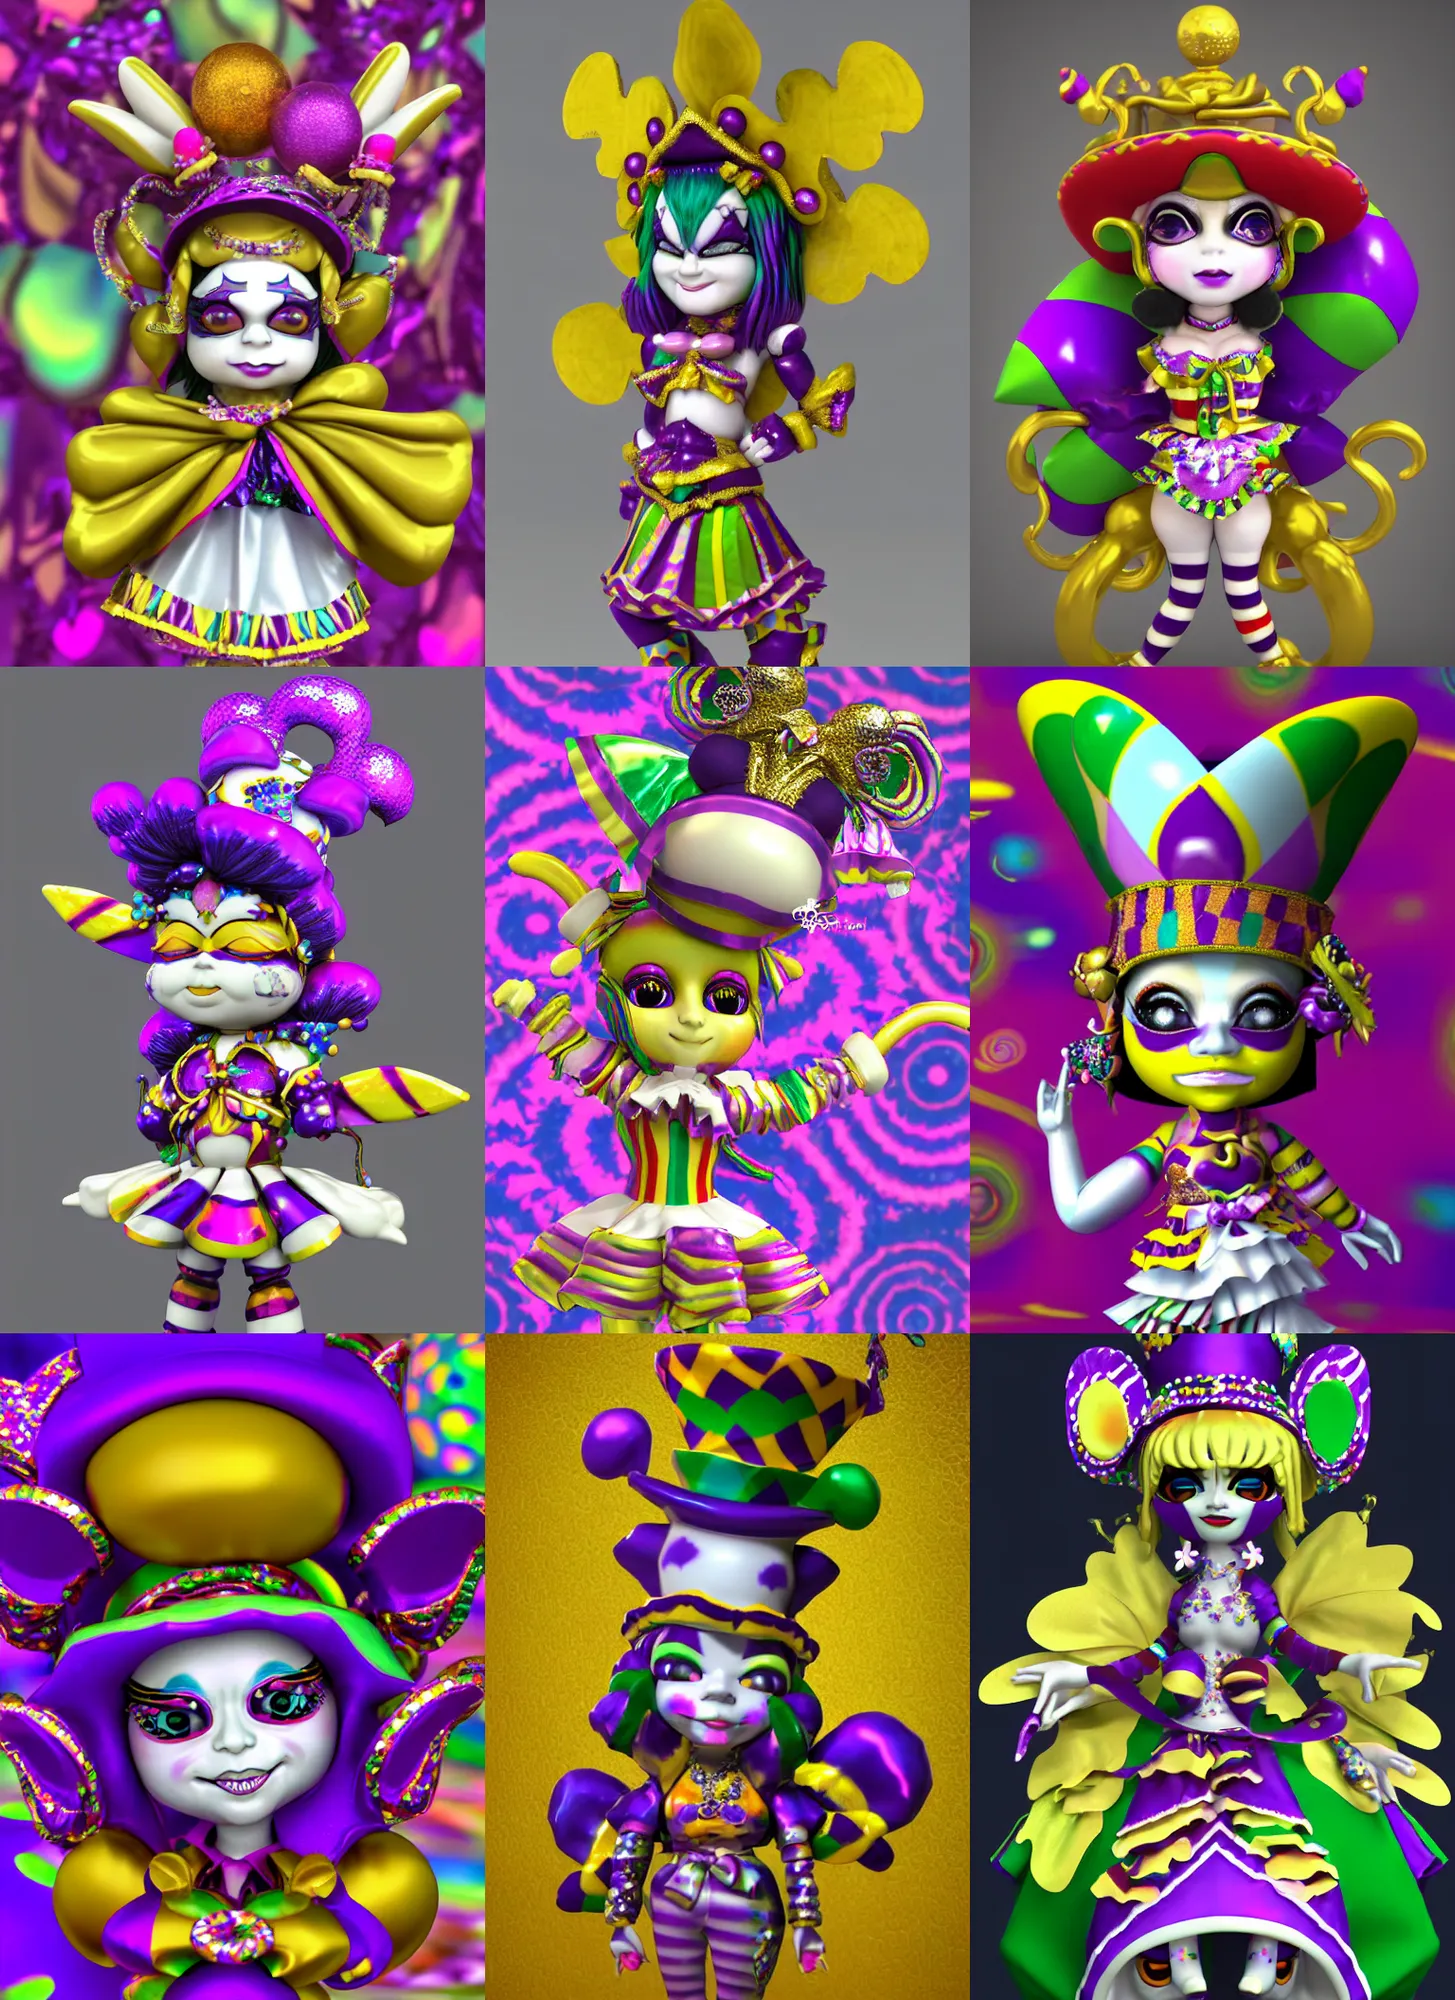 Prompt: 3d render of chibi 'porcelain Mardi Gras jester harlequin doll' by Ichiro Tanida wearing a 'jester cap and bells cockscomb cap' and wearing angel wings against a psychedelic swirly background with 3d butterflies and 3d flowers n the style of 1990's CG graphics 3d rendered y2K aesthetic by Ichiro Tanida, 3DO magazine